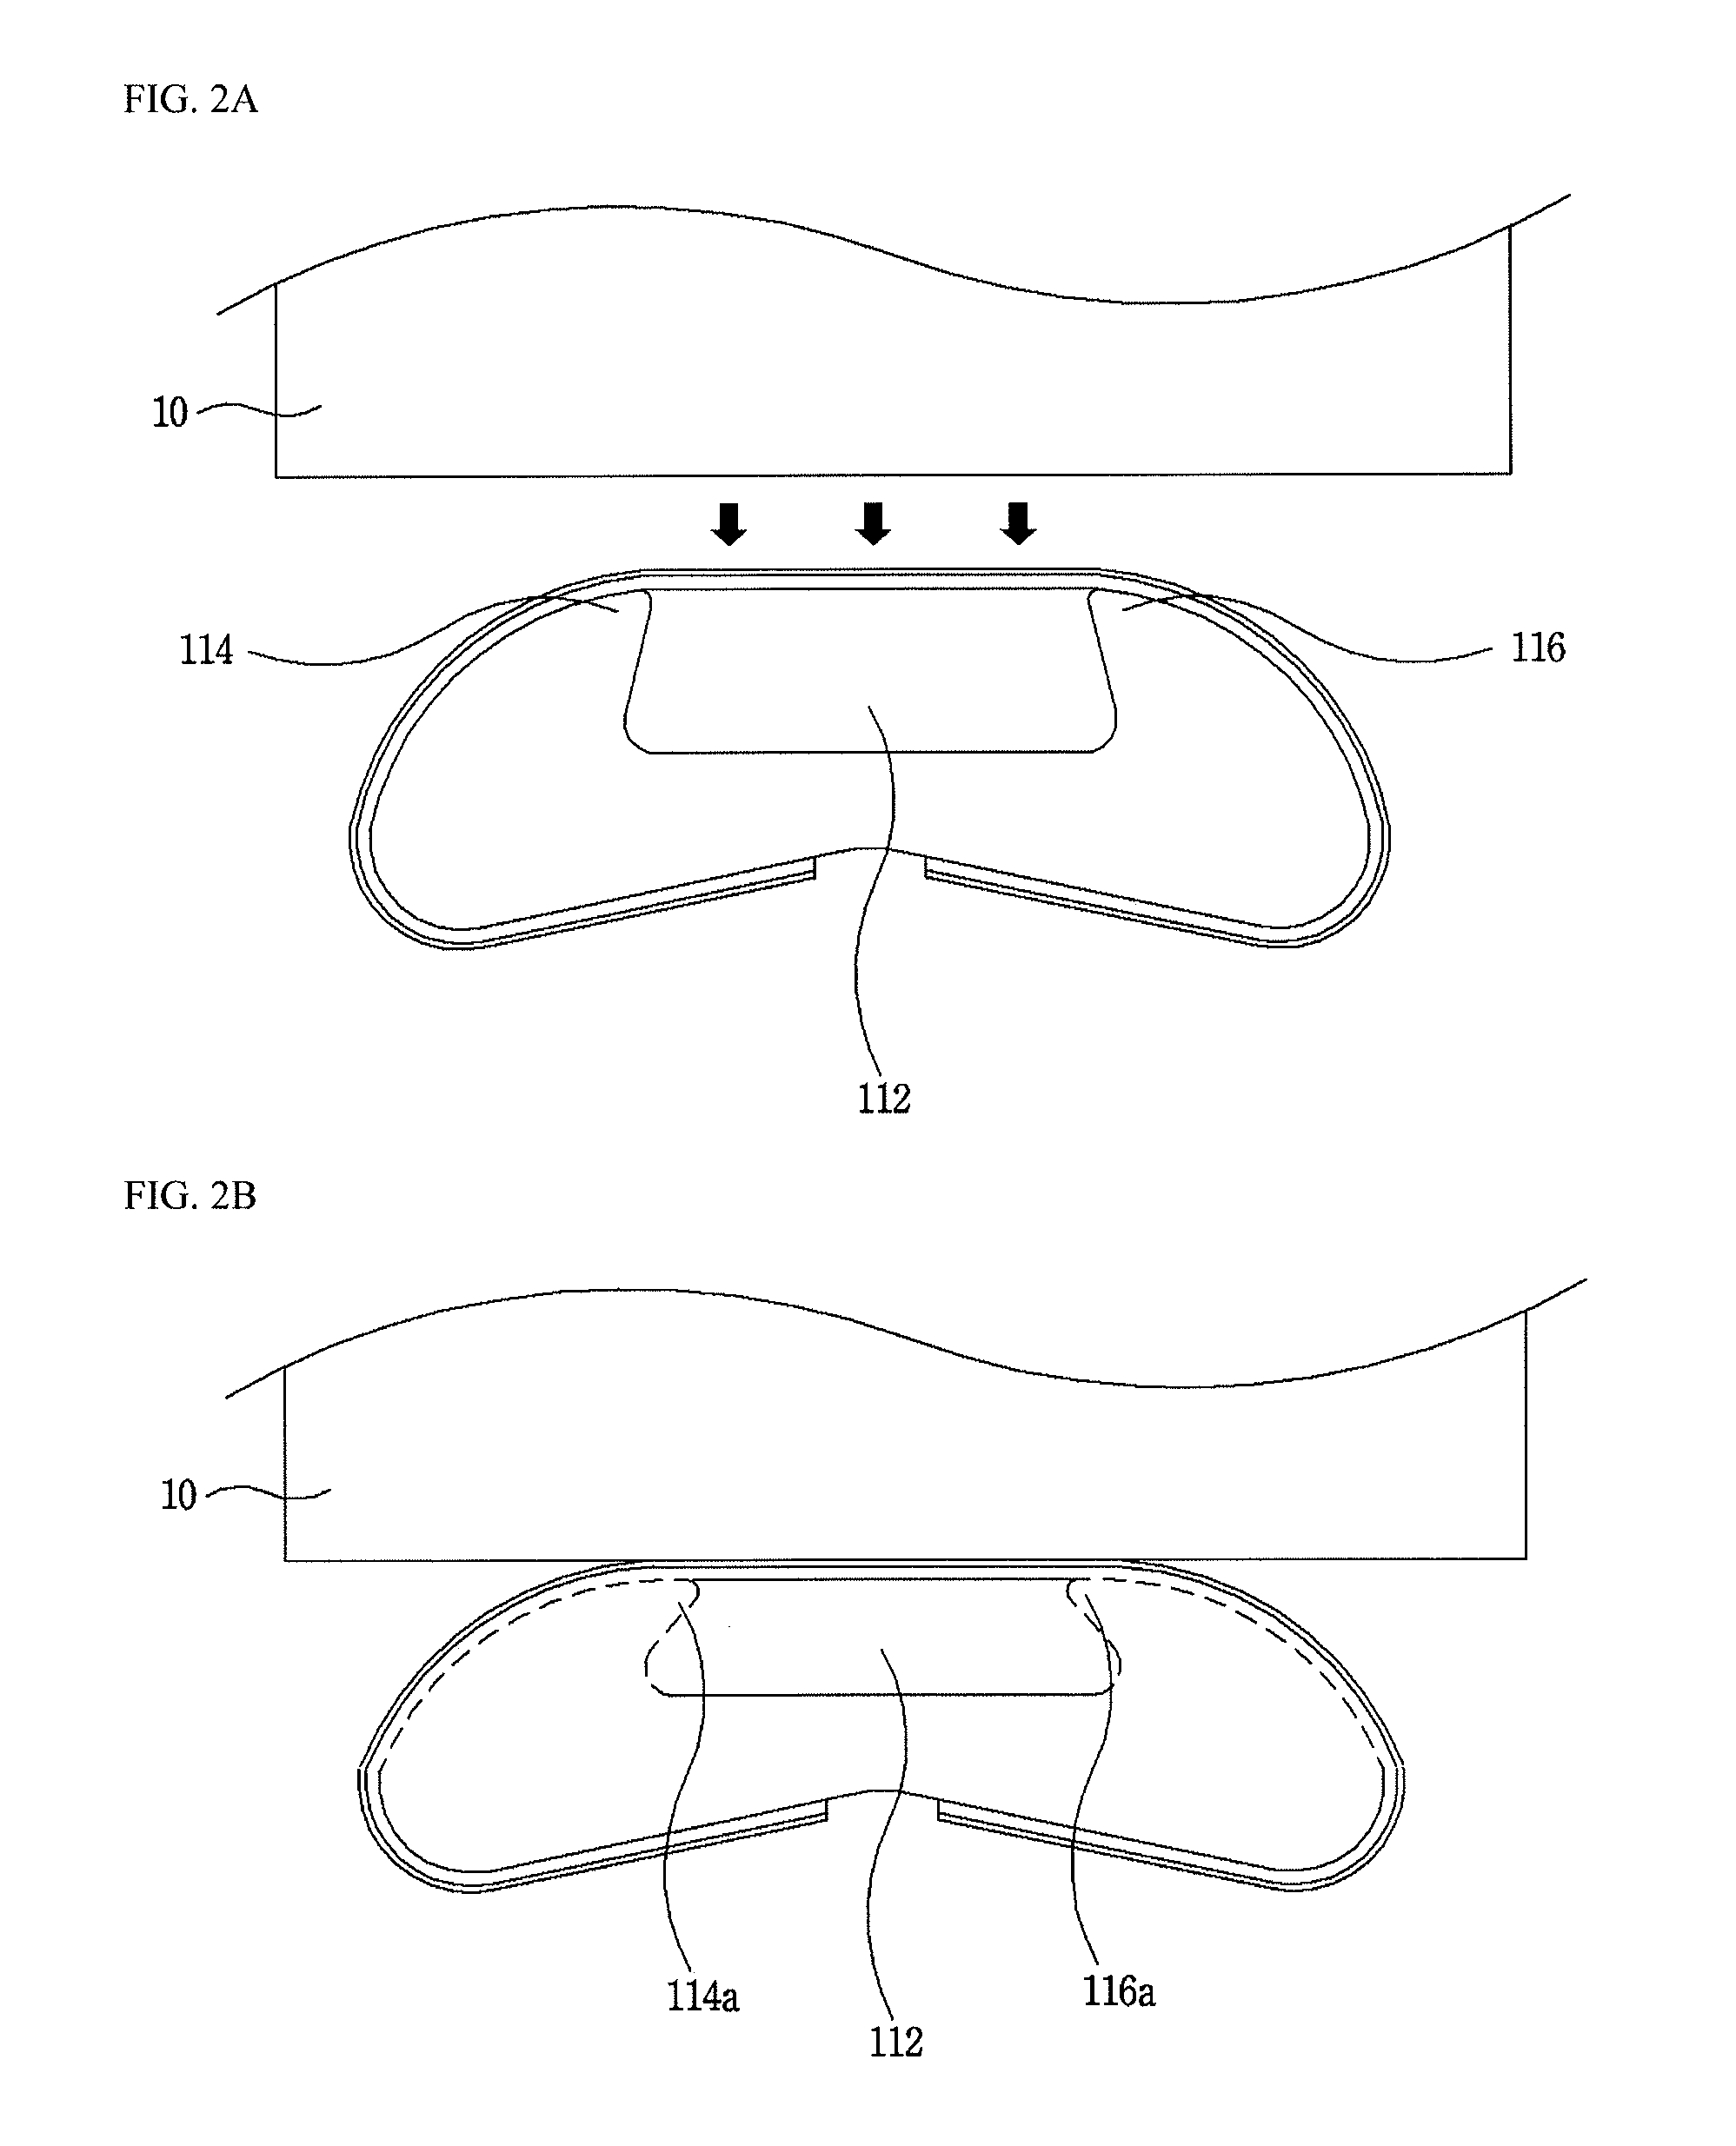 Elastic electric contact terminal adapted to small size